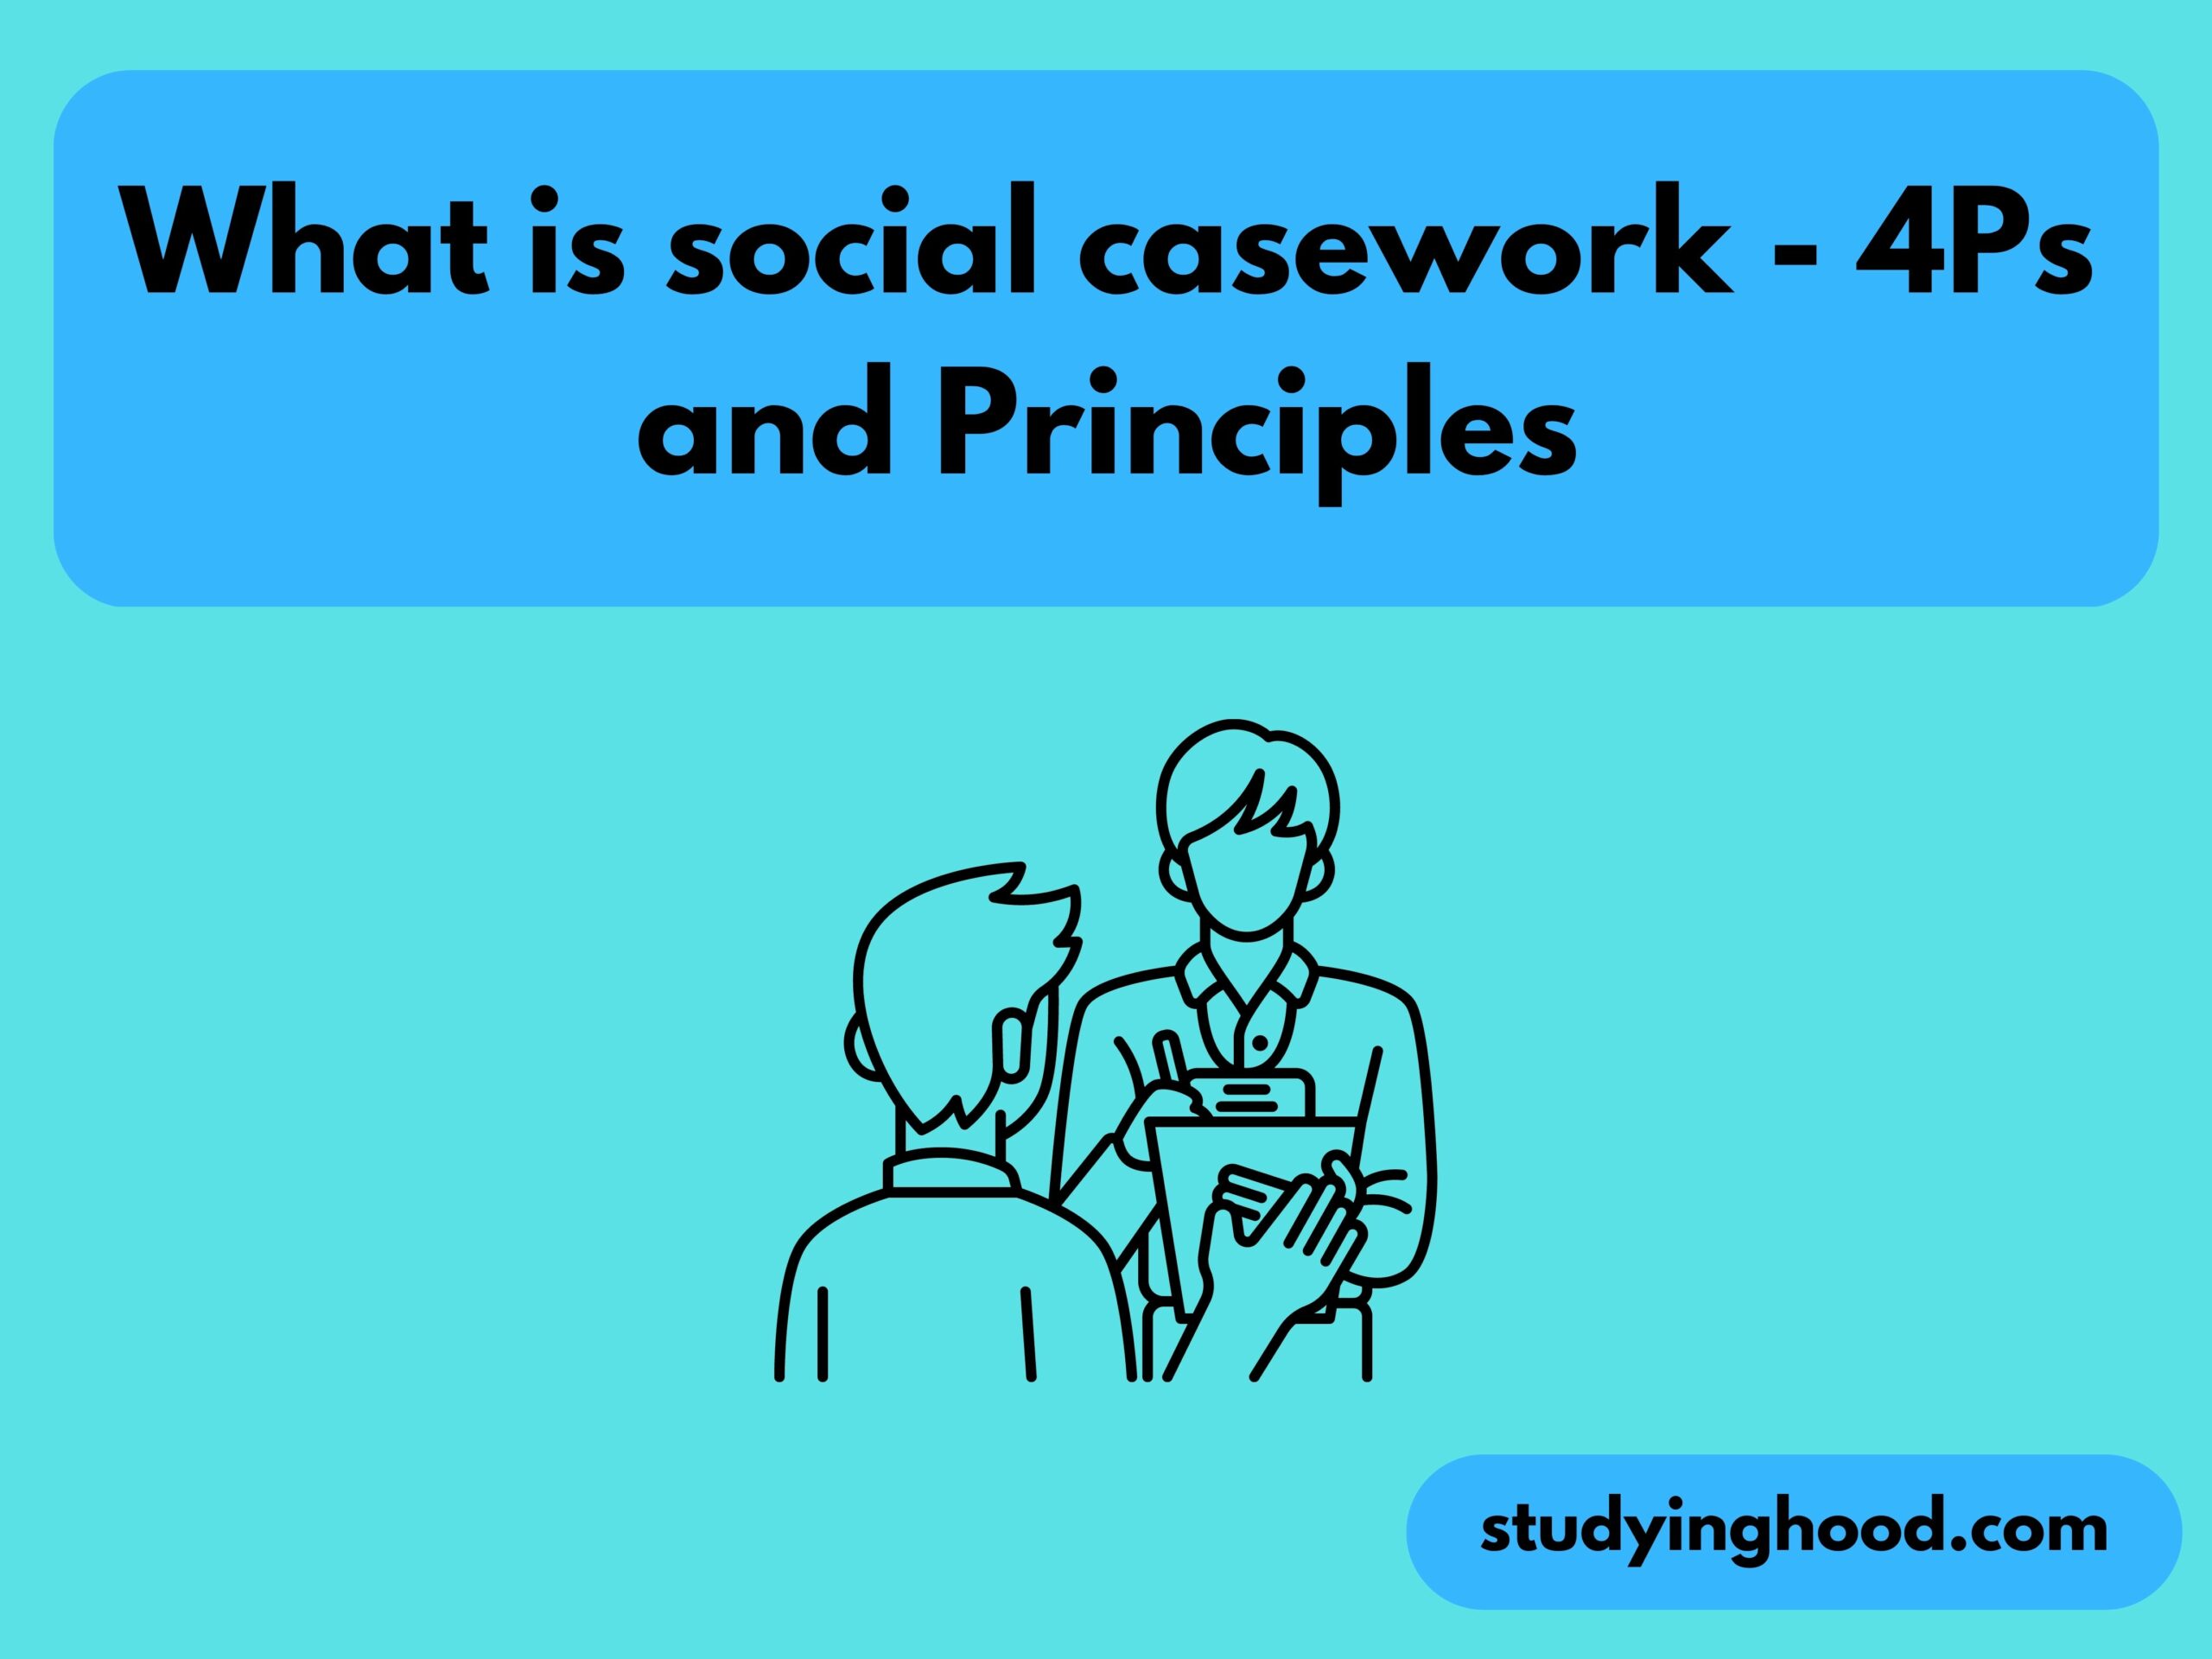 What is social casework - 4Ps and Principles